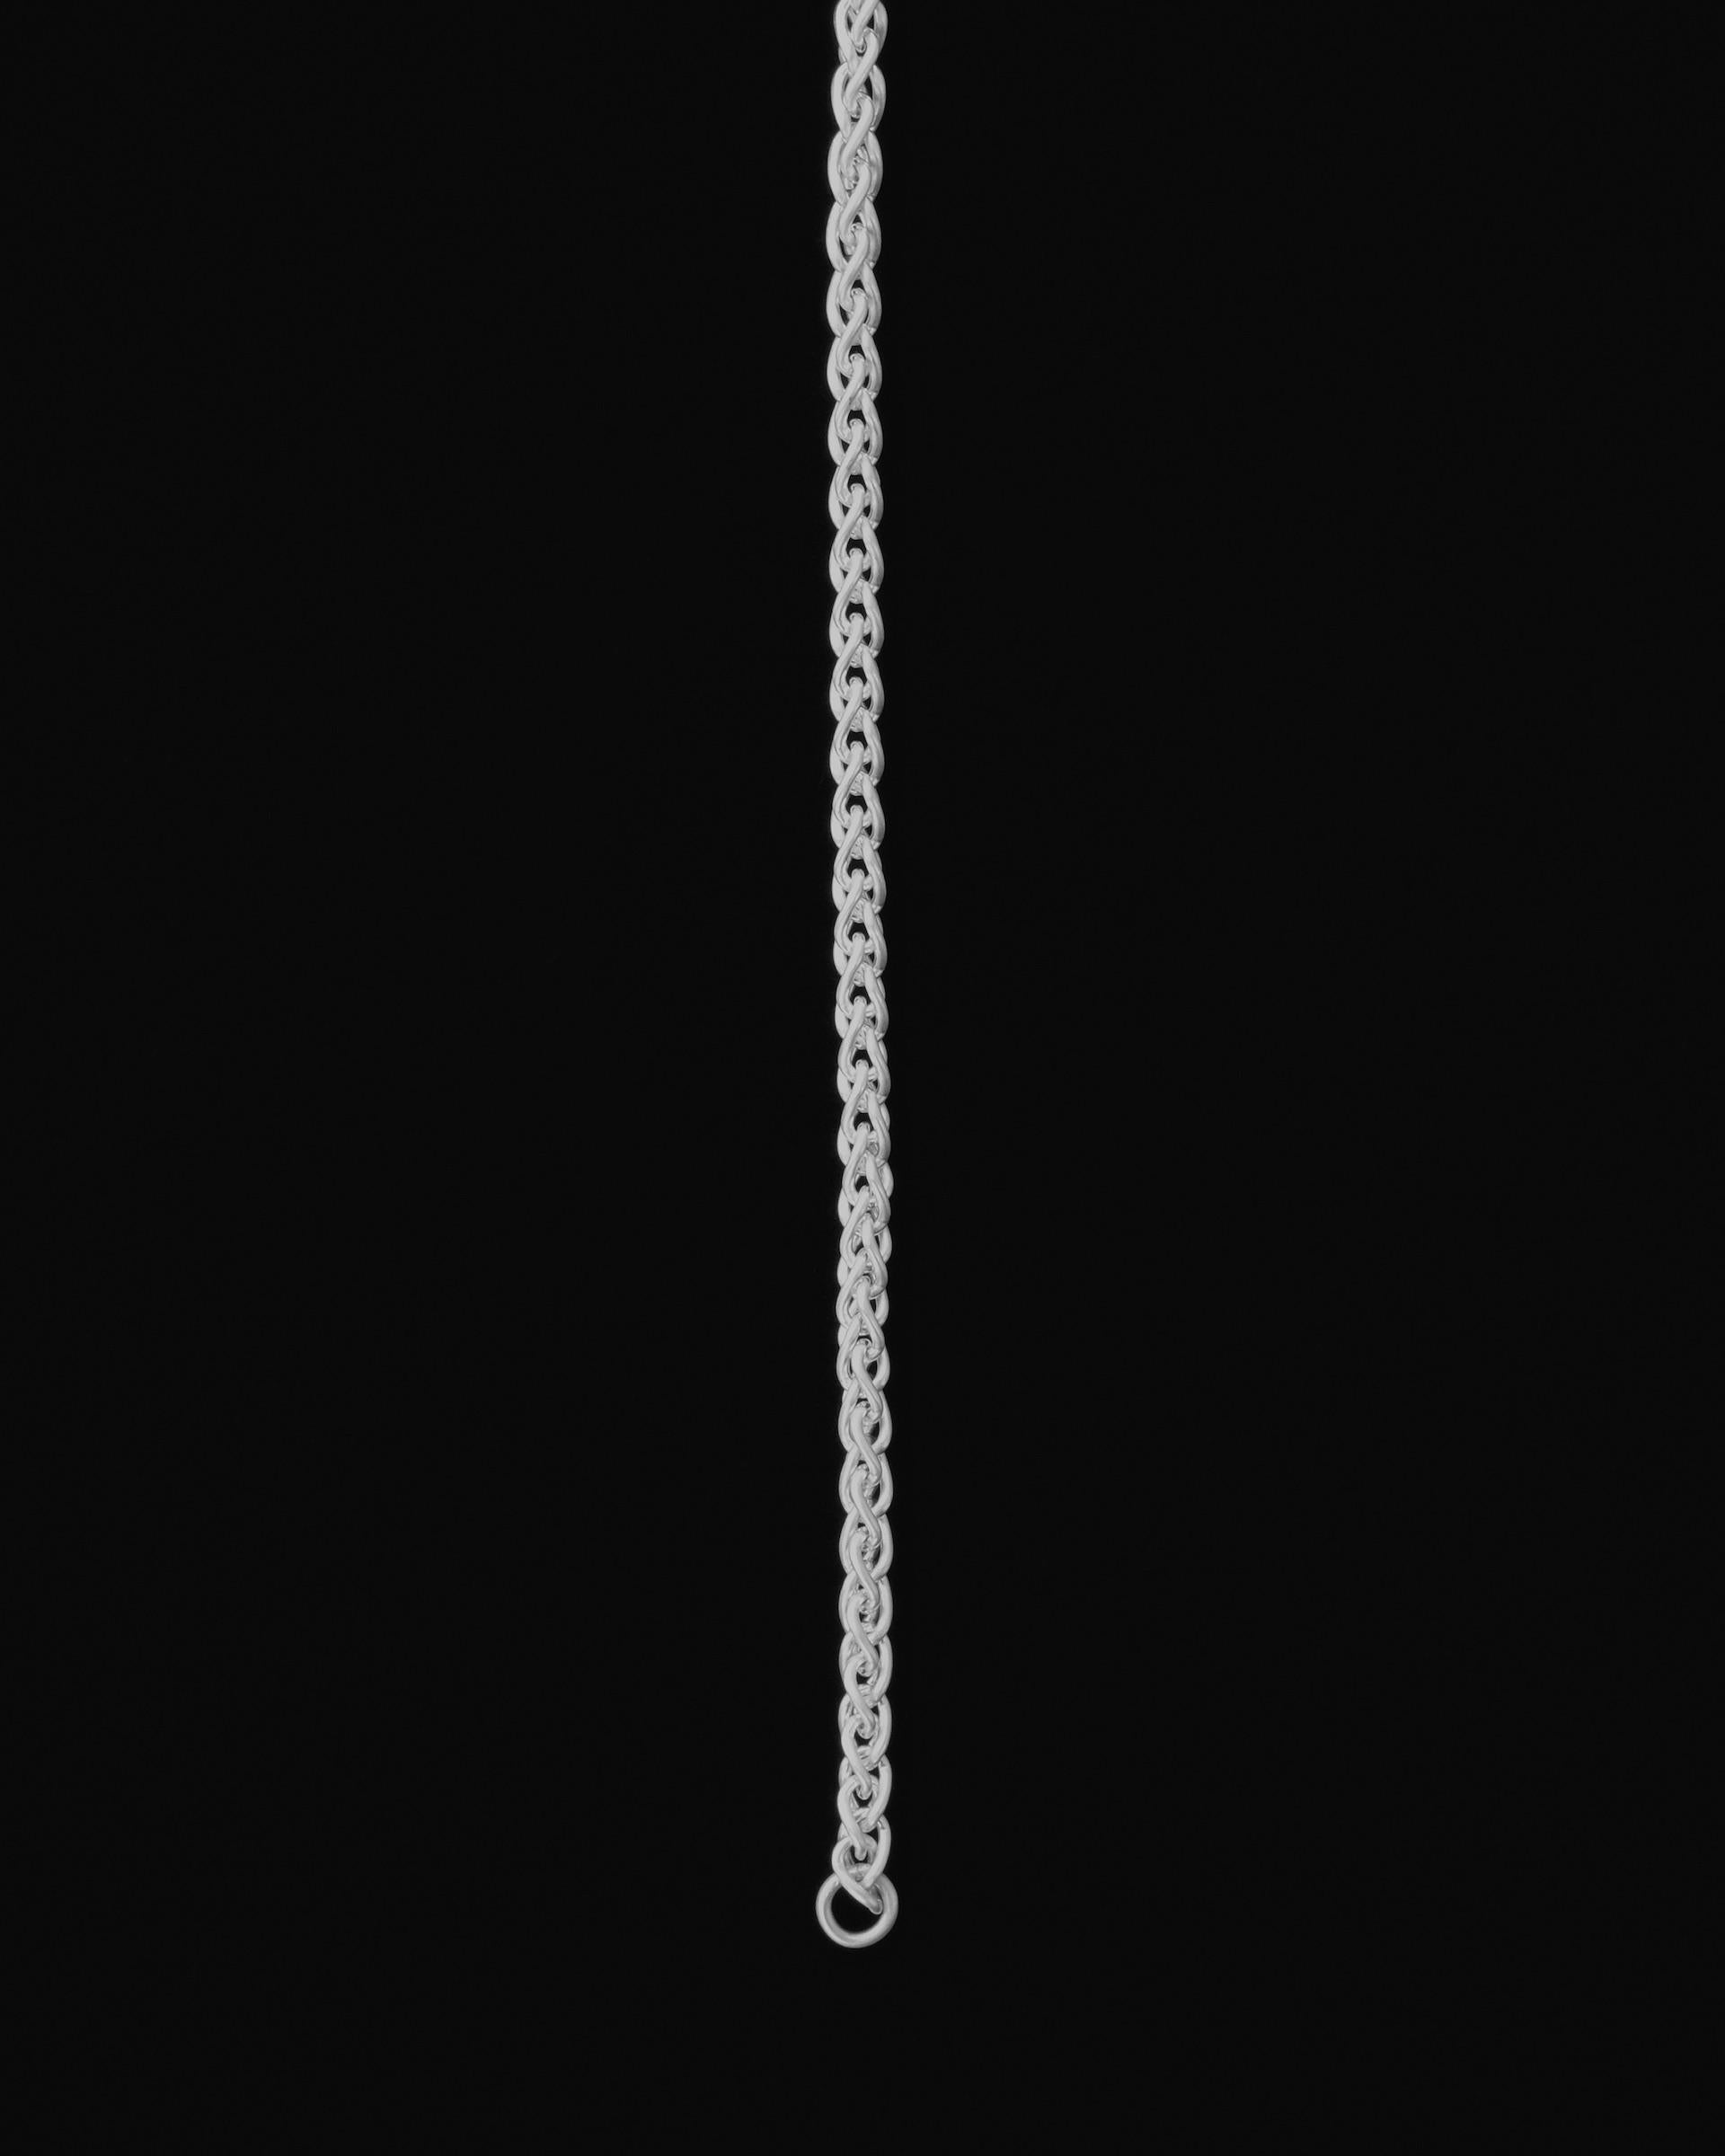 Artisan Tiana Marie Combes White Gold Woven Chain Necklace For Sale